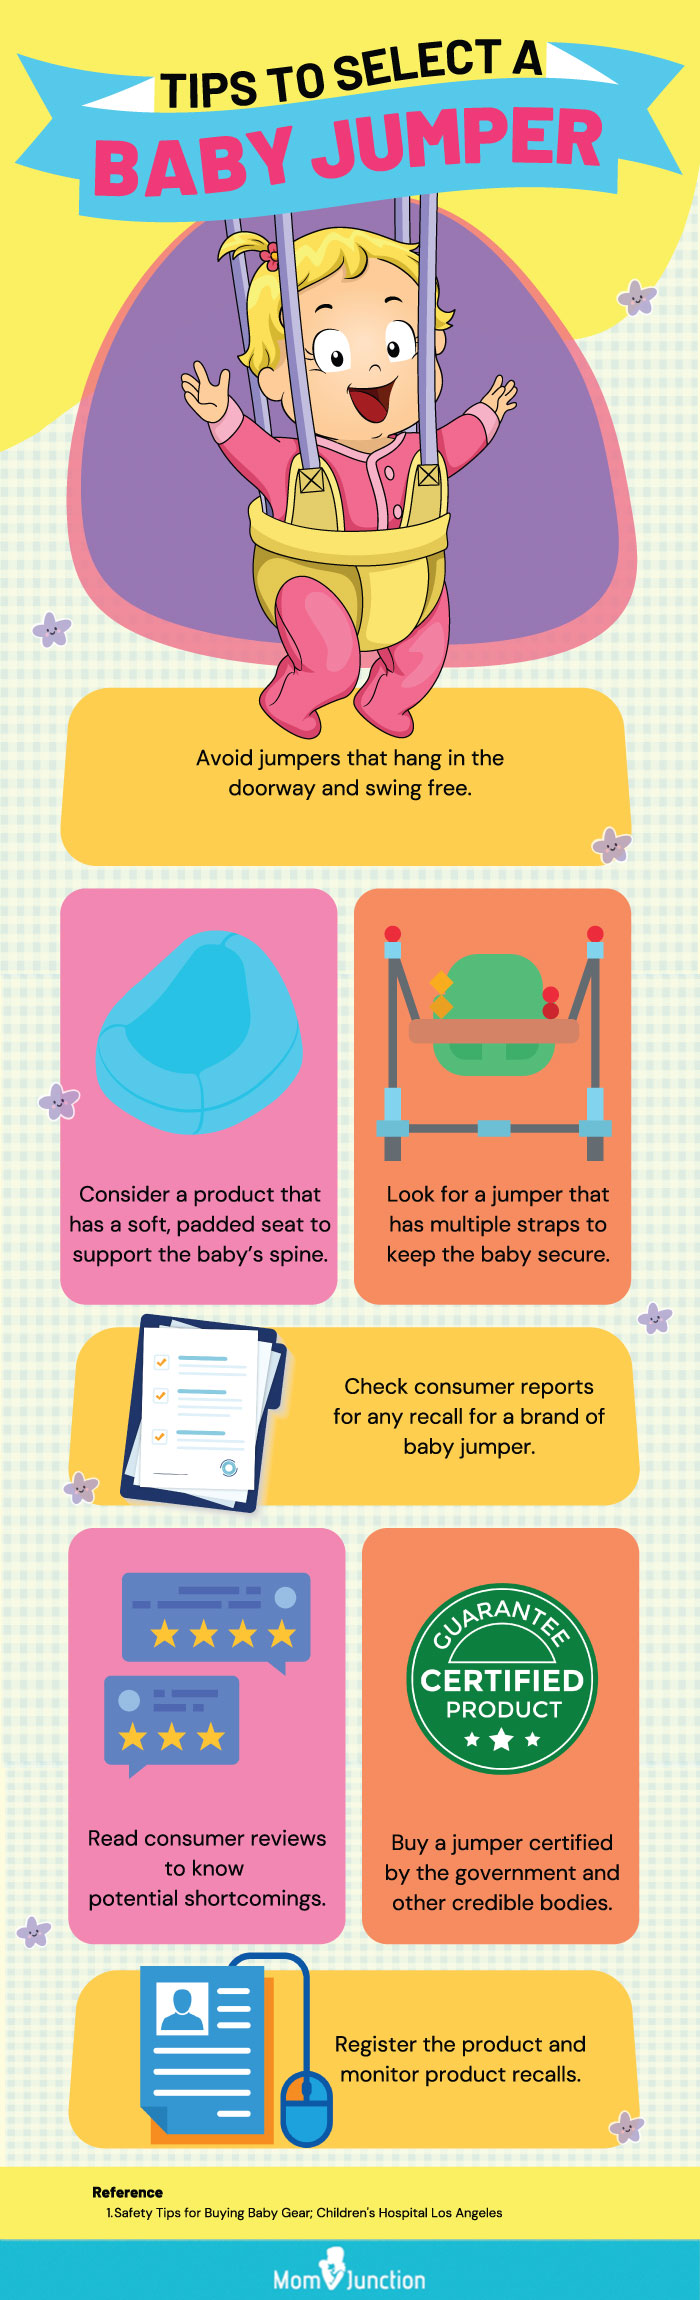 tips to select baby jumper (infographic)